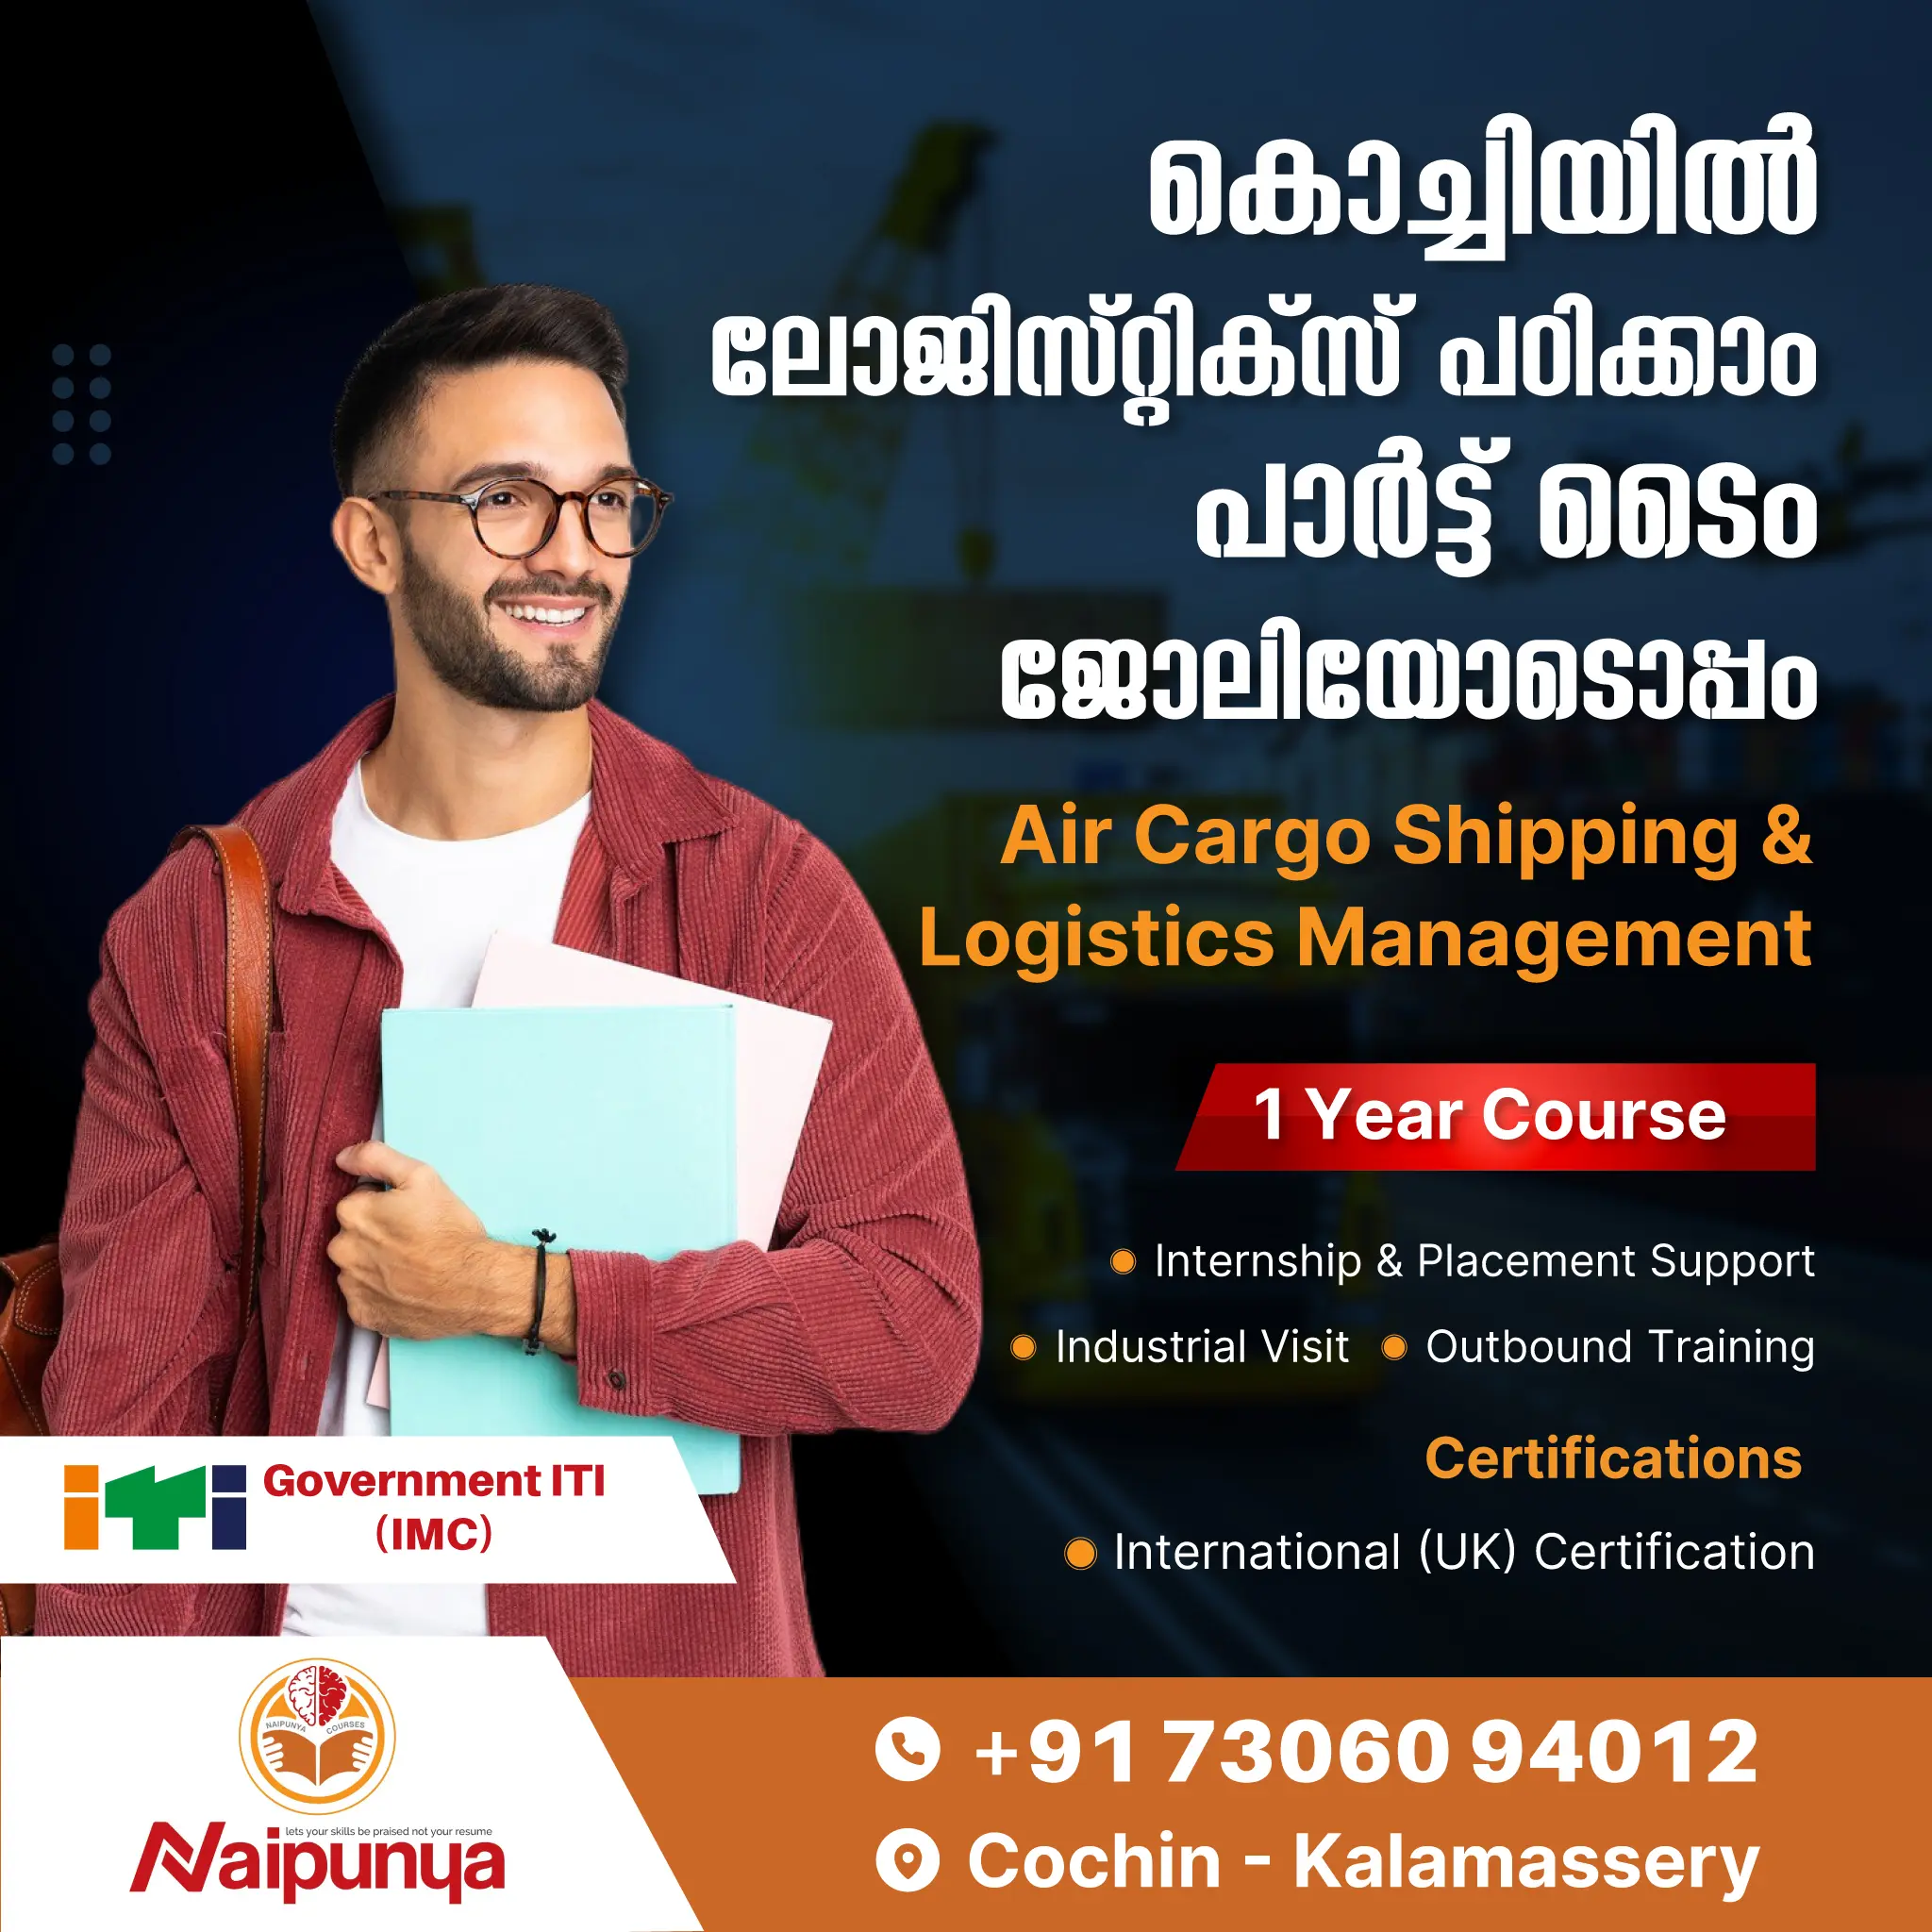 Learn Air Cargo Shipping & Logistics Management